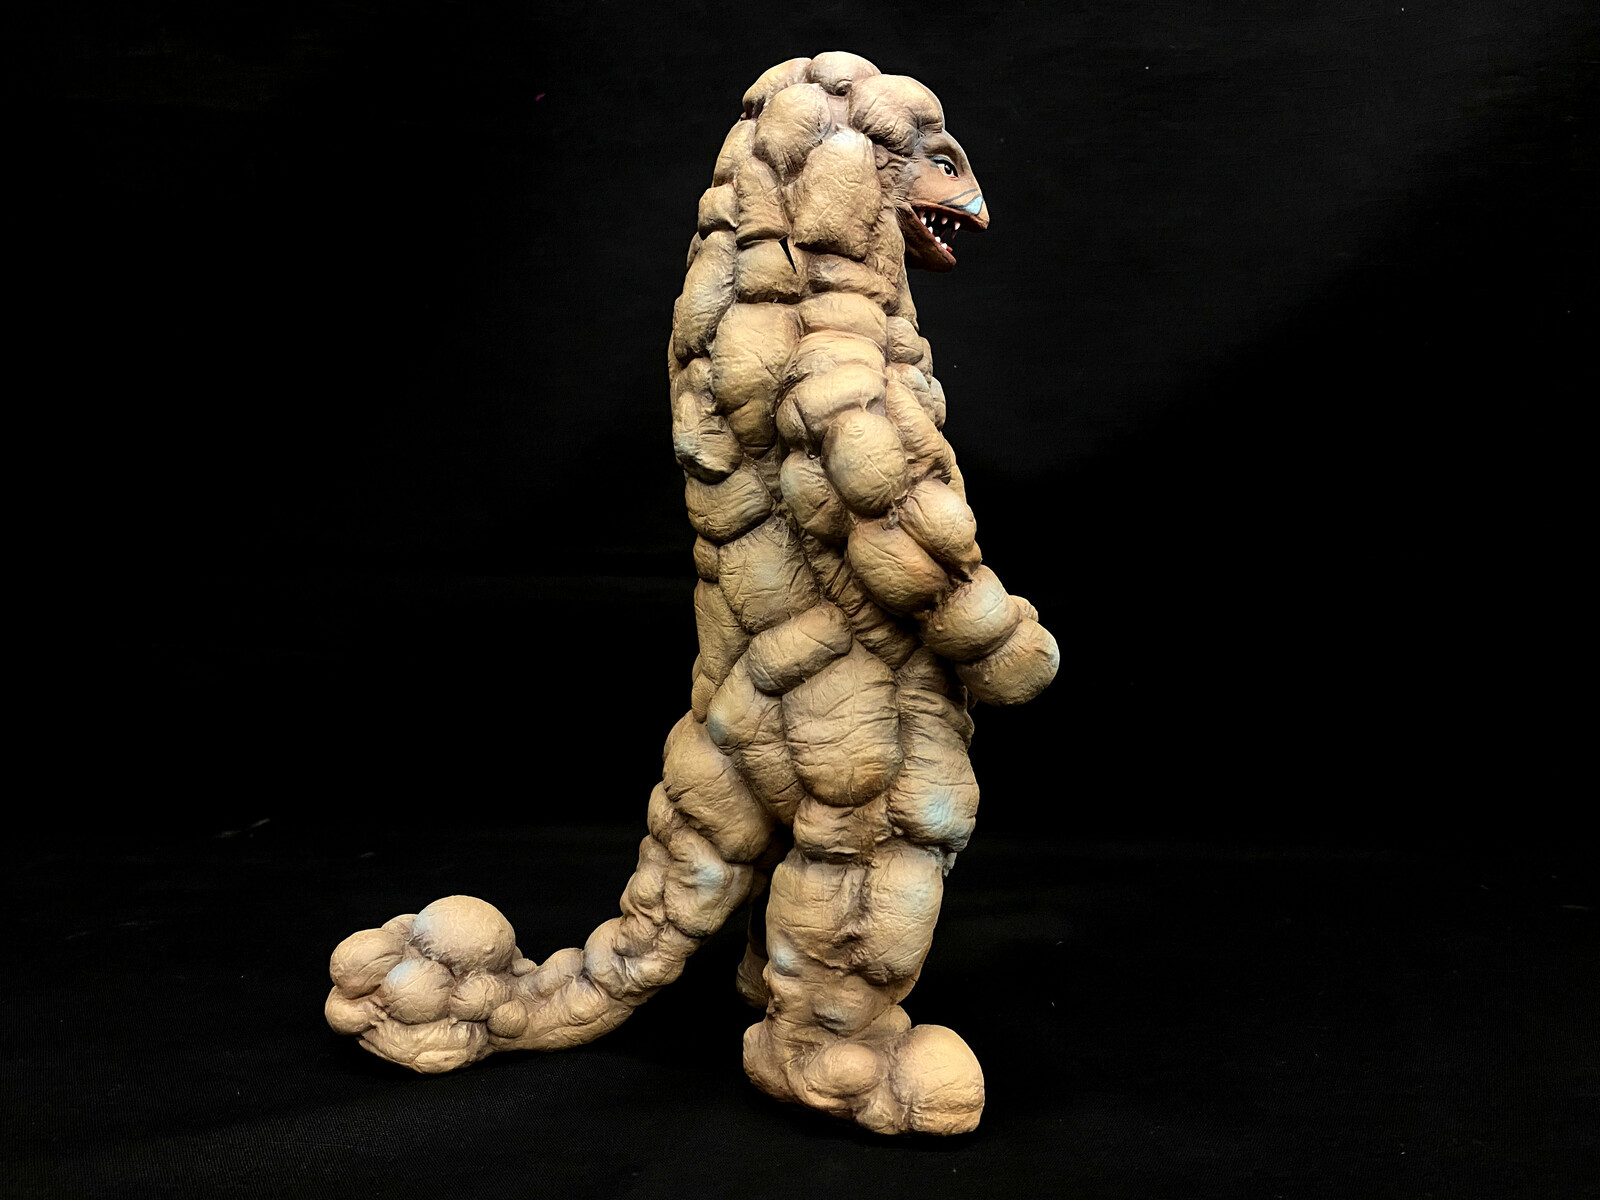 Ultra Kaiju Shugaron Art statue  (シュガロン音波怪獣) 完成品
Portfolio &amp; Store: https://www.solidart.club/
This piece is hand-painted and finished, 
with its own unique quality and detail 
that is the trademark of a handcrafted 
Art Of Toys custom product.